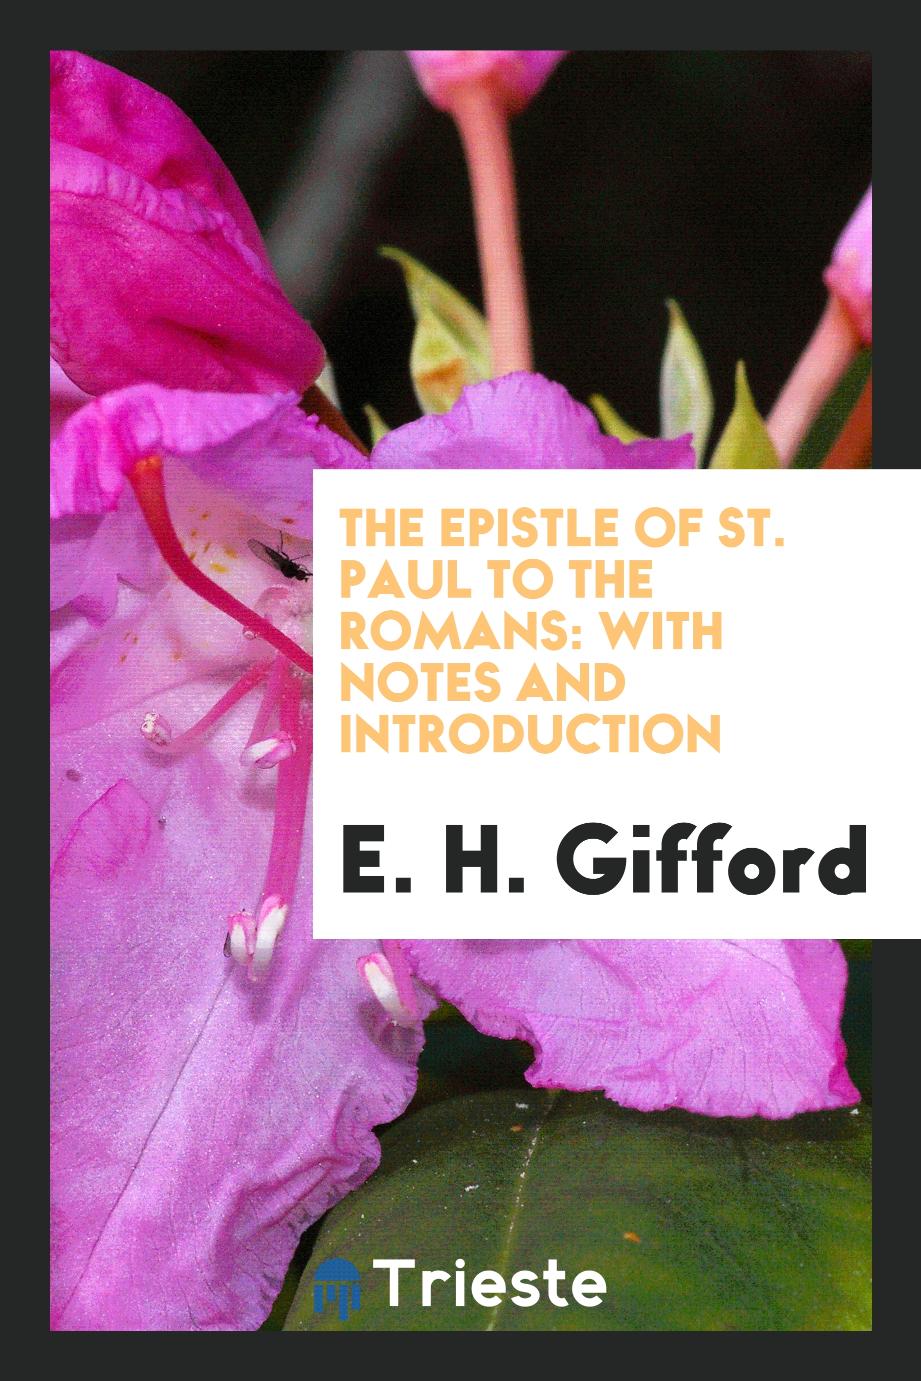 The Epistle of St. Paul to the Romans: With Notes and Introduction